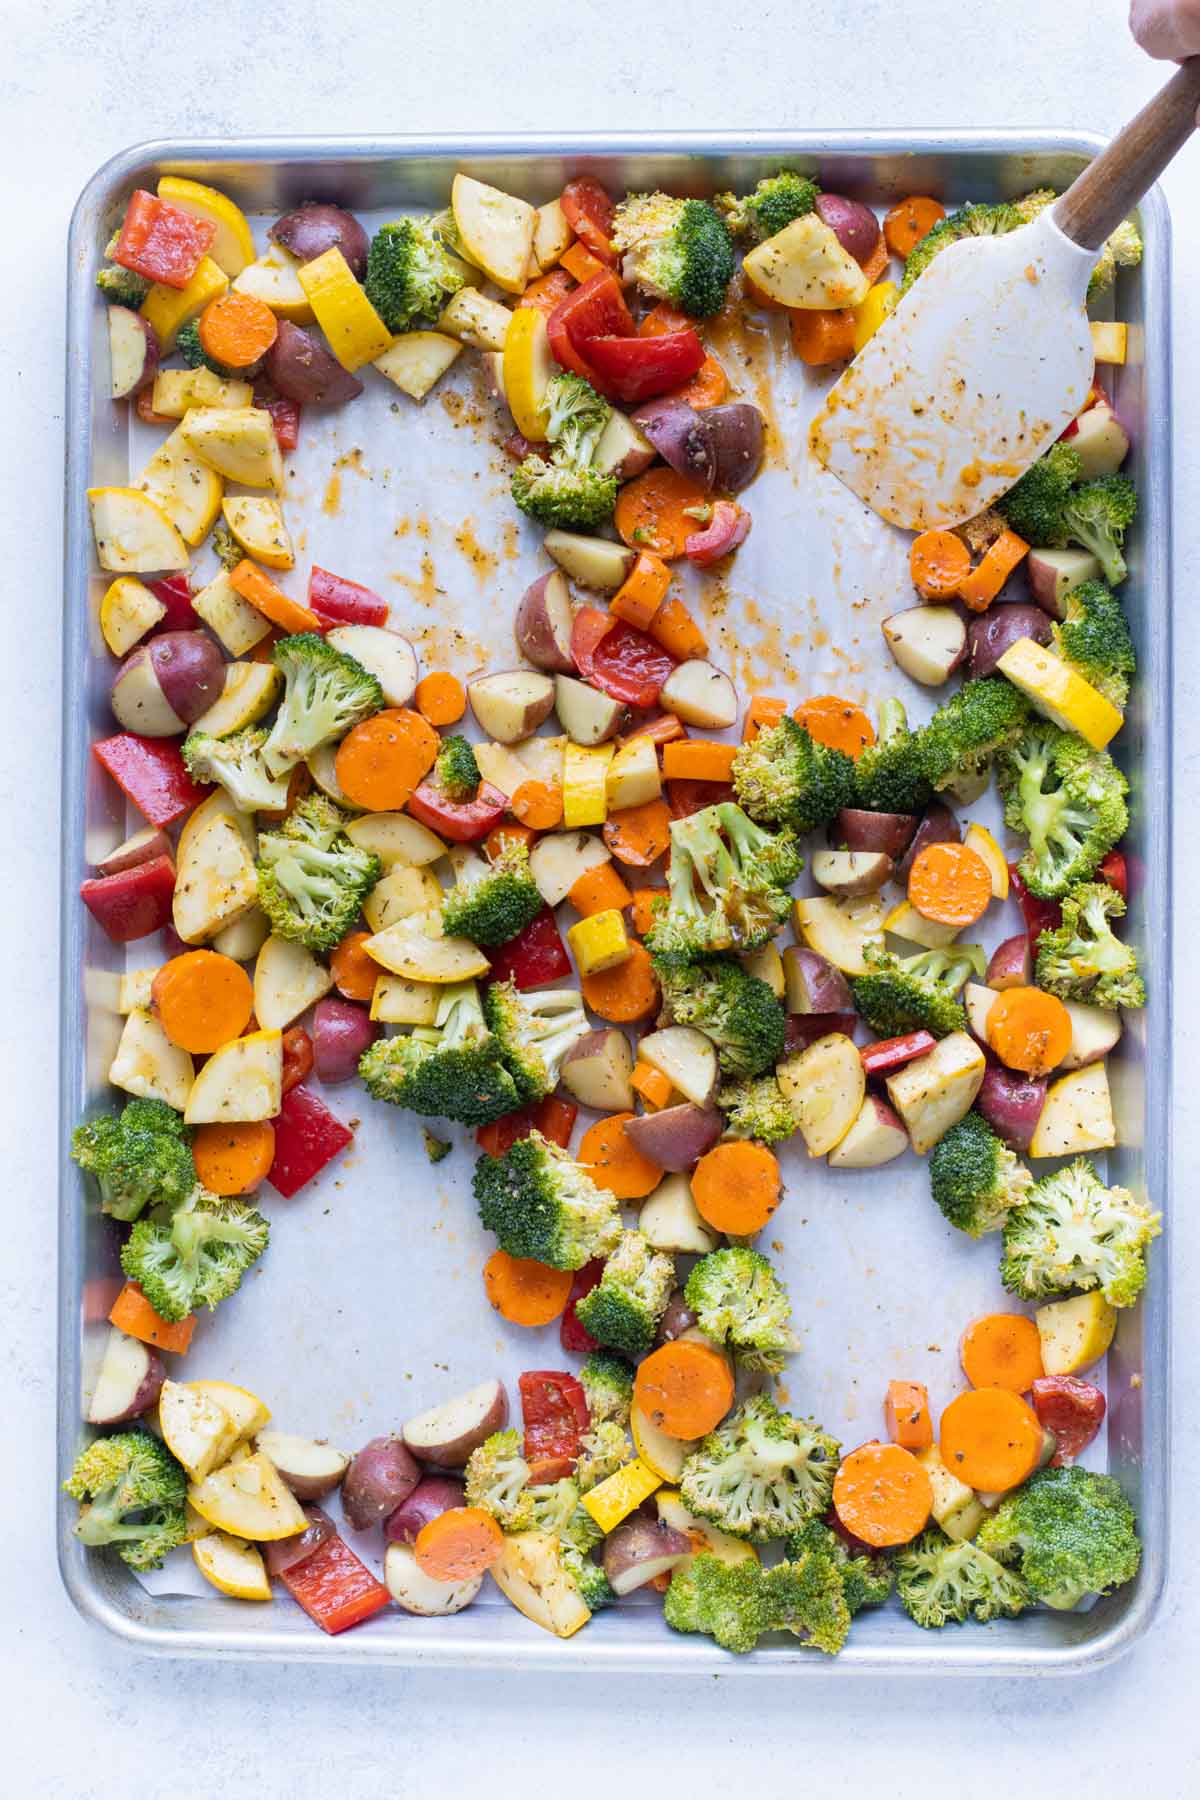 Holes are created in a tray of vegetables for chicken breasts.